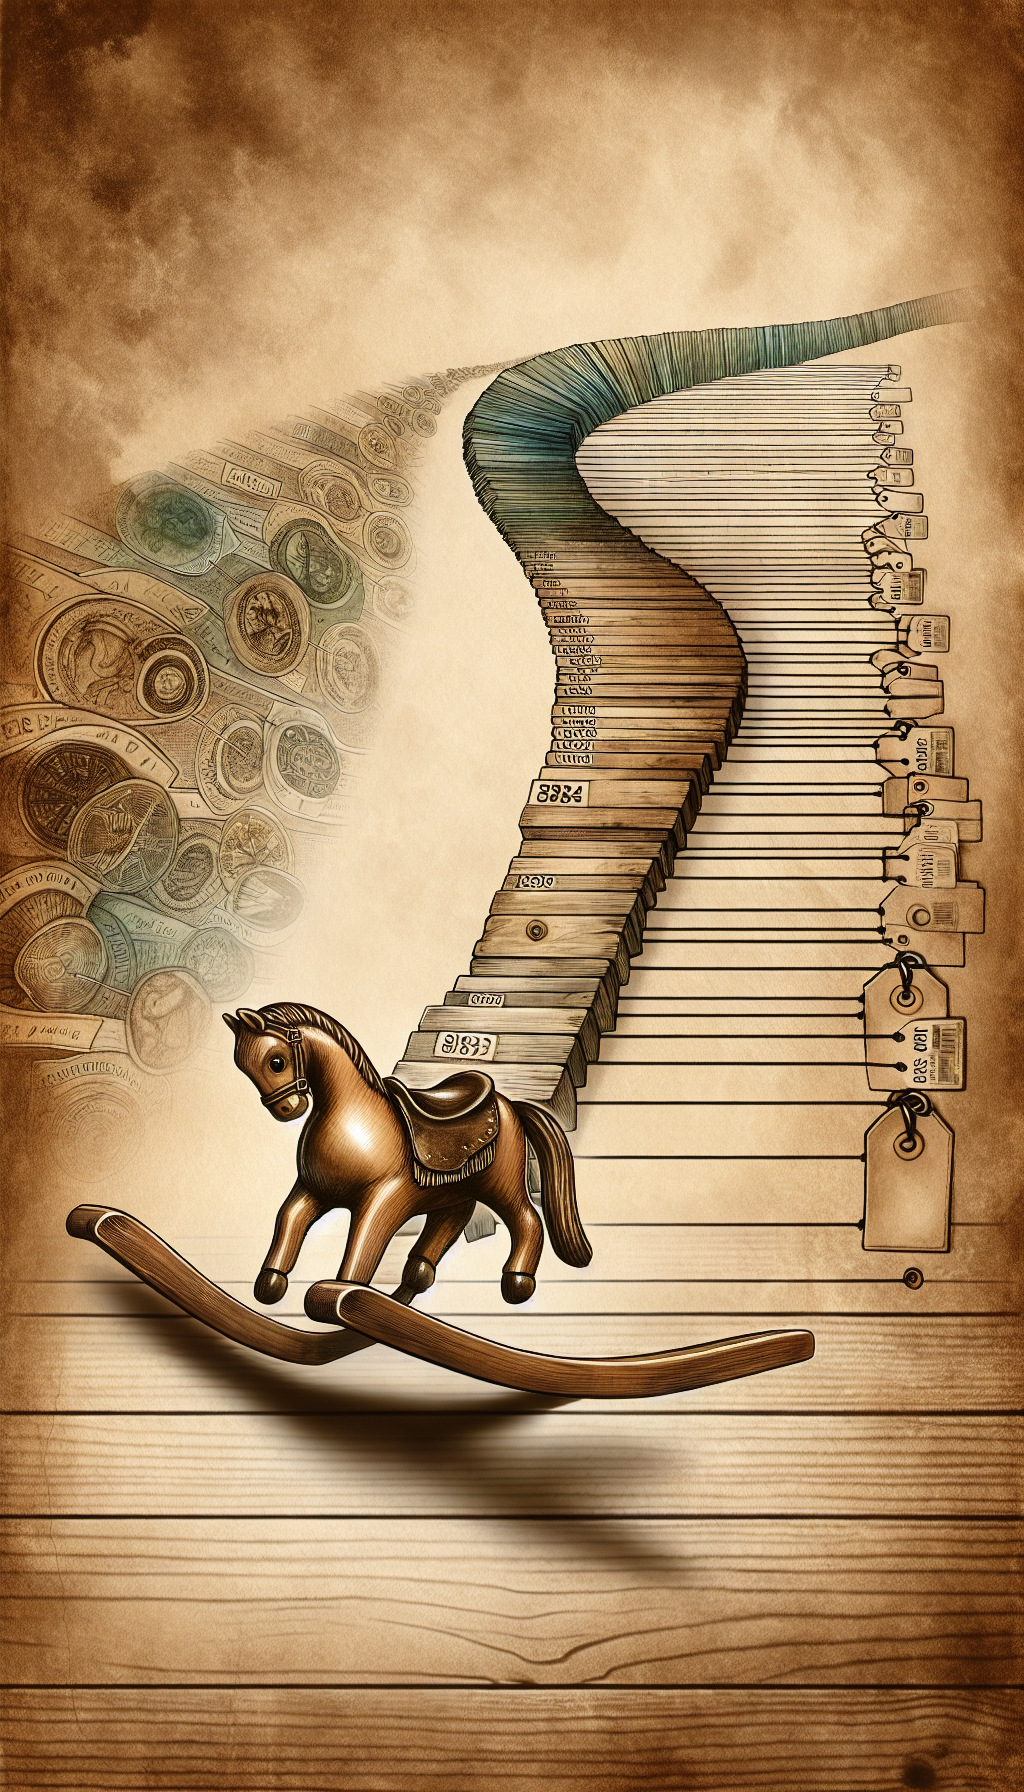 An aged wooden rocking horse sits at the forefront, with each curved rocker resting upon a timeline that flows into the distance. Carved notches along the timeline signify key historical periods, while faded price tags ascending from past to present dangle, symbolizing the horse's increasing value. The image blends styles: sepia tones portray its antiquity, contrasting with vibrant watercolor hues indicating its timeless worth.